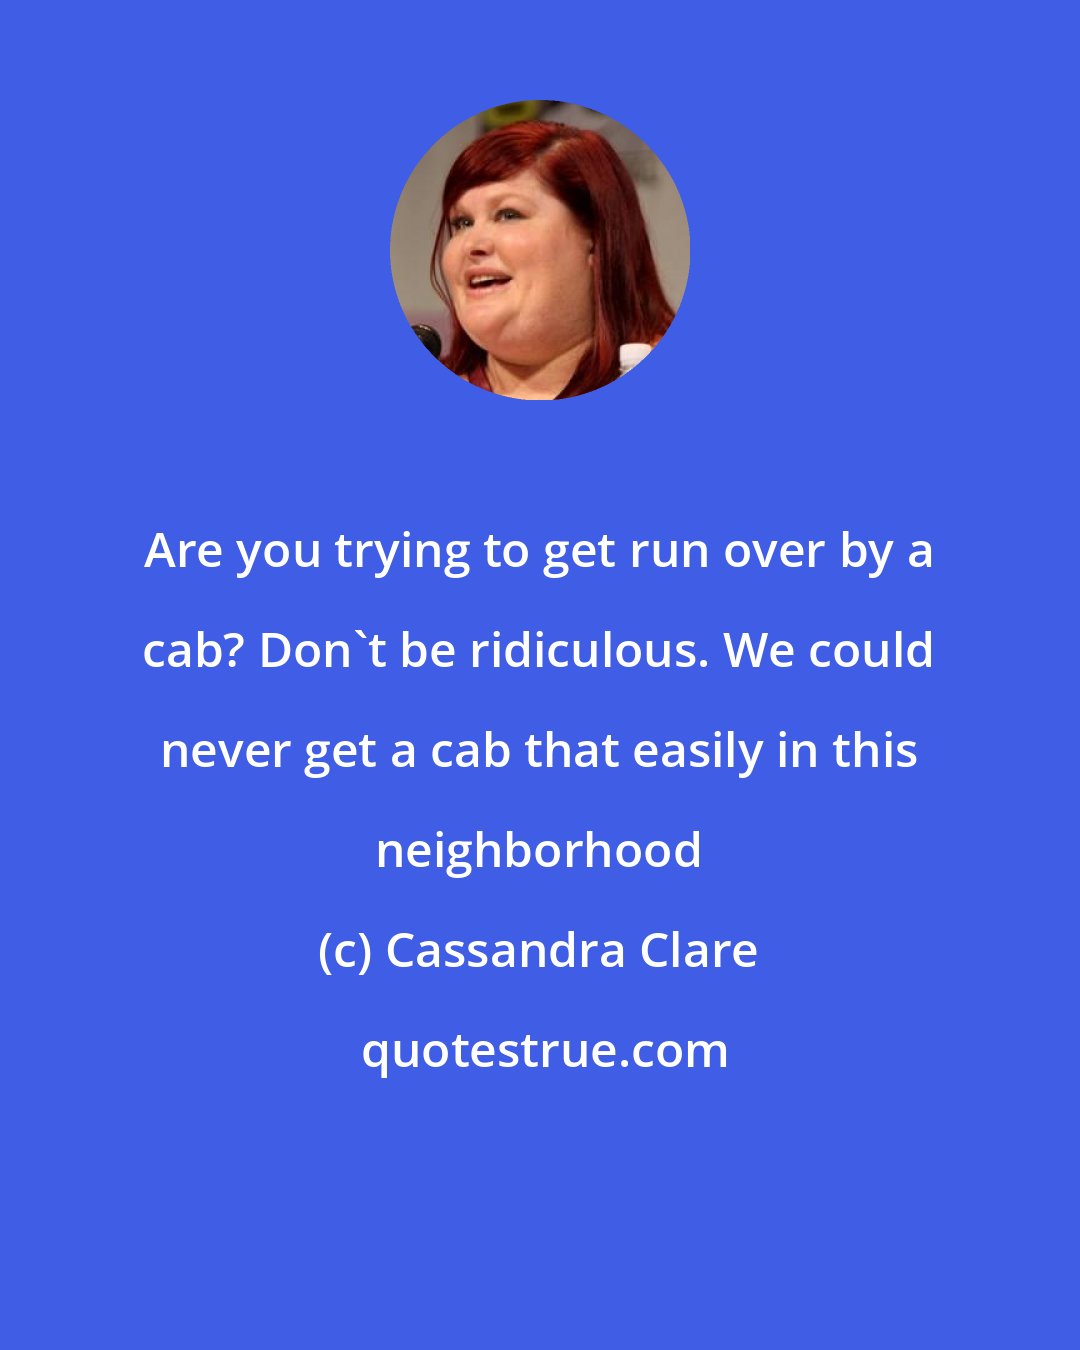 Cassandra Clare: Are you trying to get run over by a cab? Don't be ridiculous. We could never get a cab that easily in this neighborhood